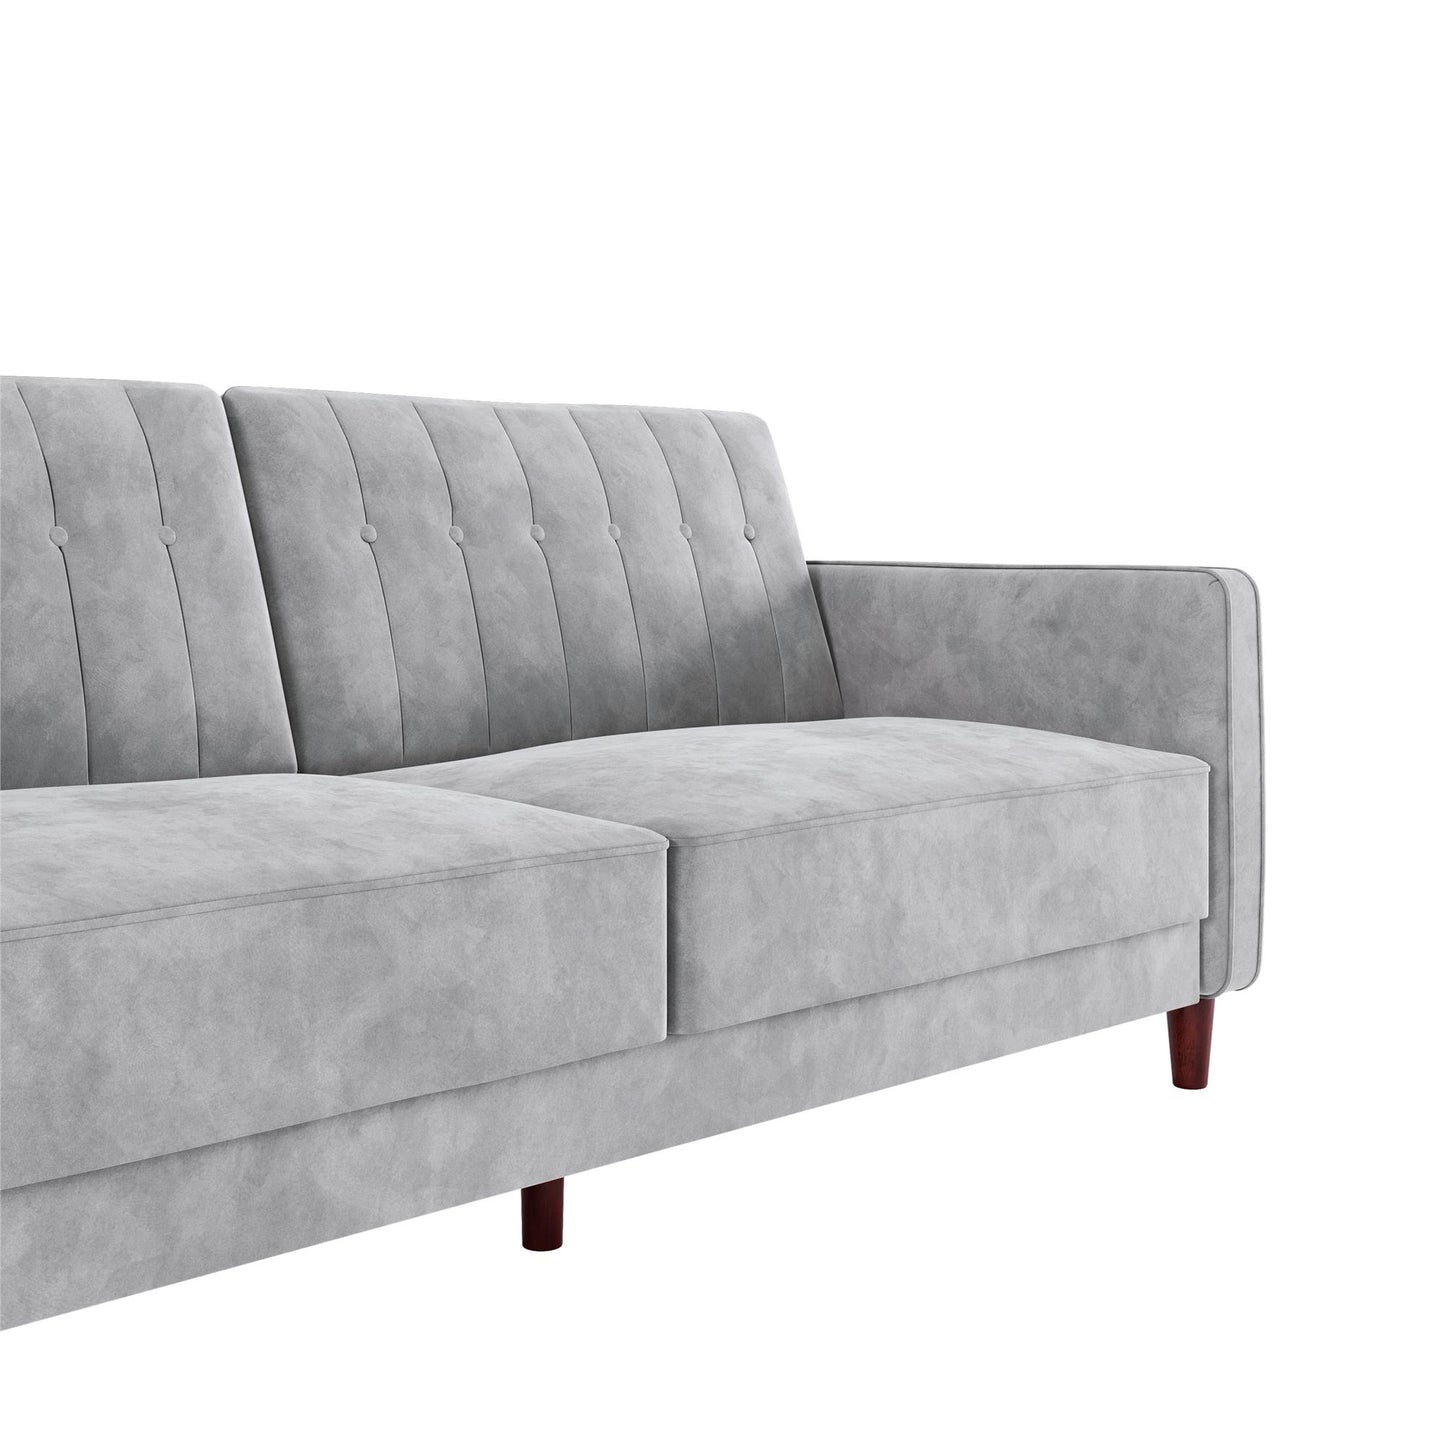 Pin Tufted Transitional Futon with Vertical Stitching and Button Tufting - Light Gray